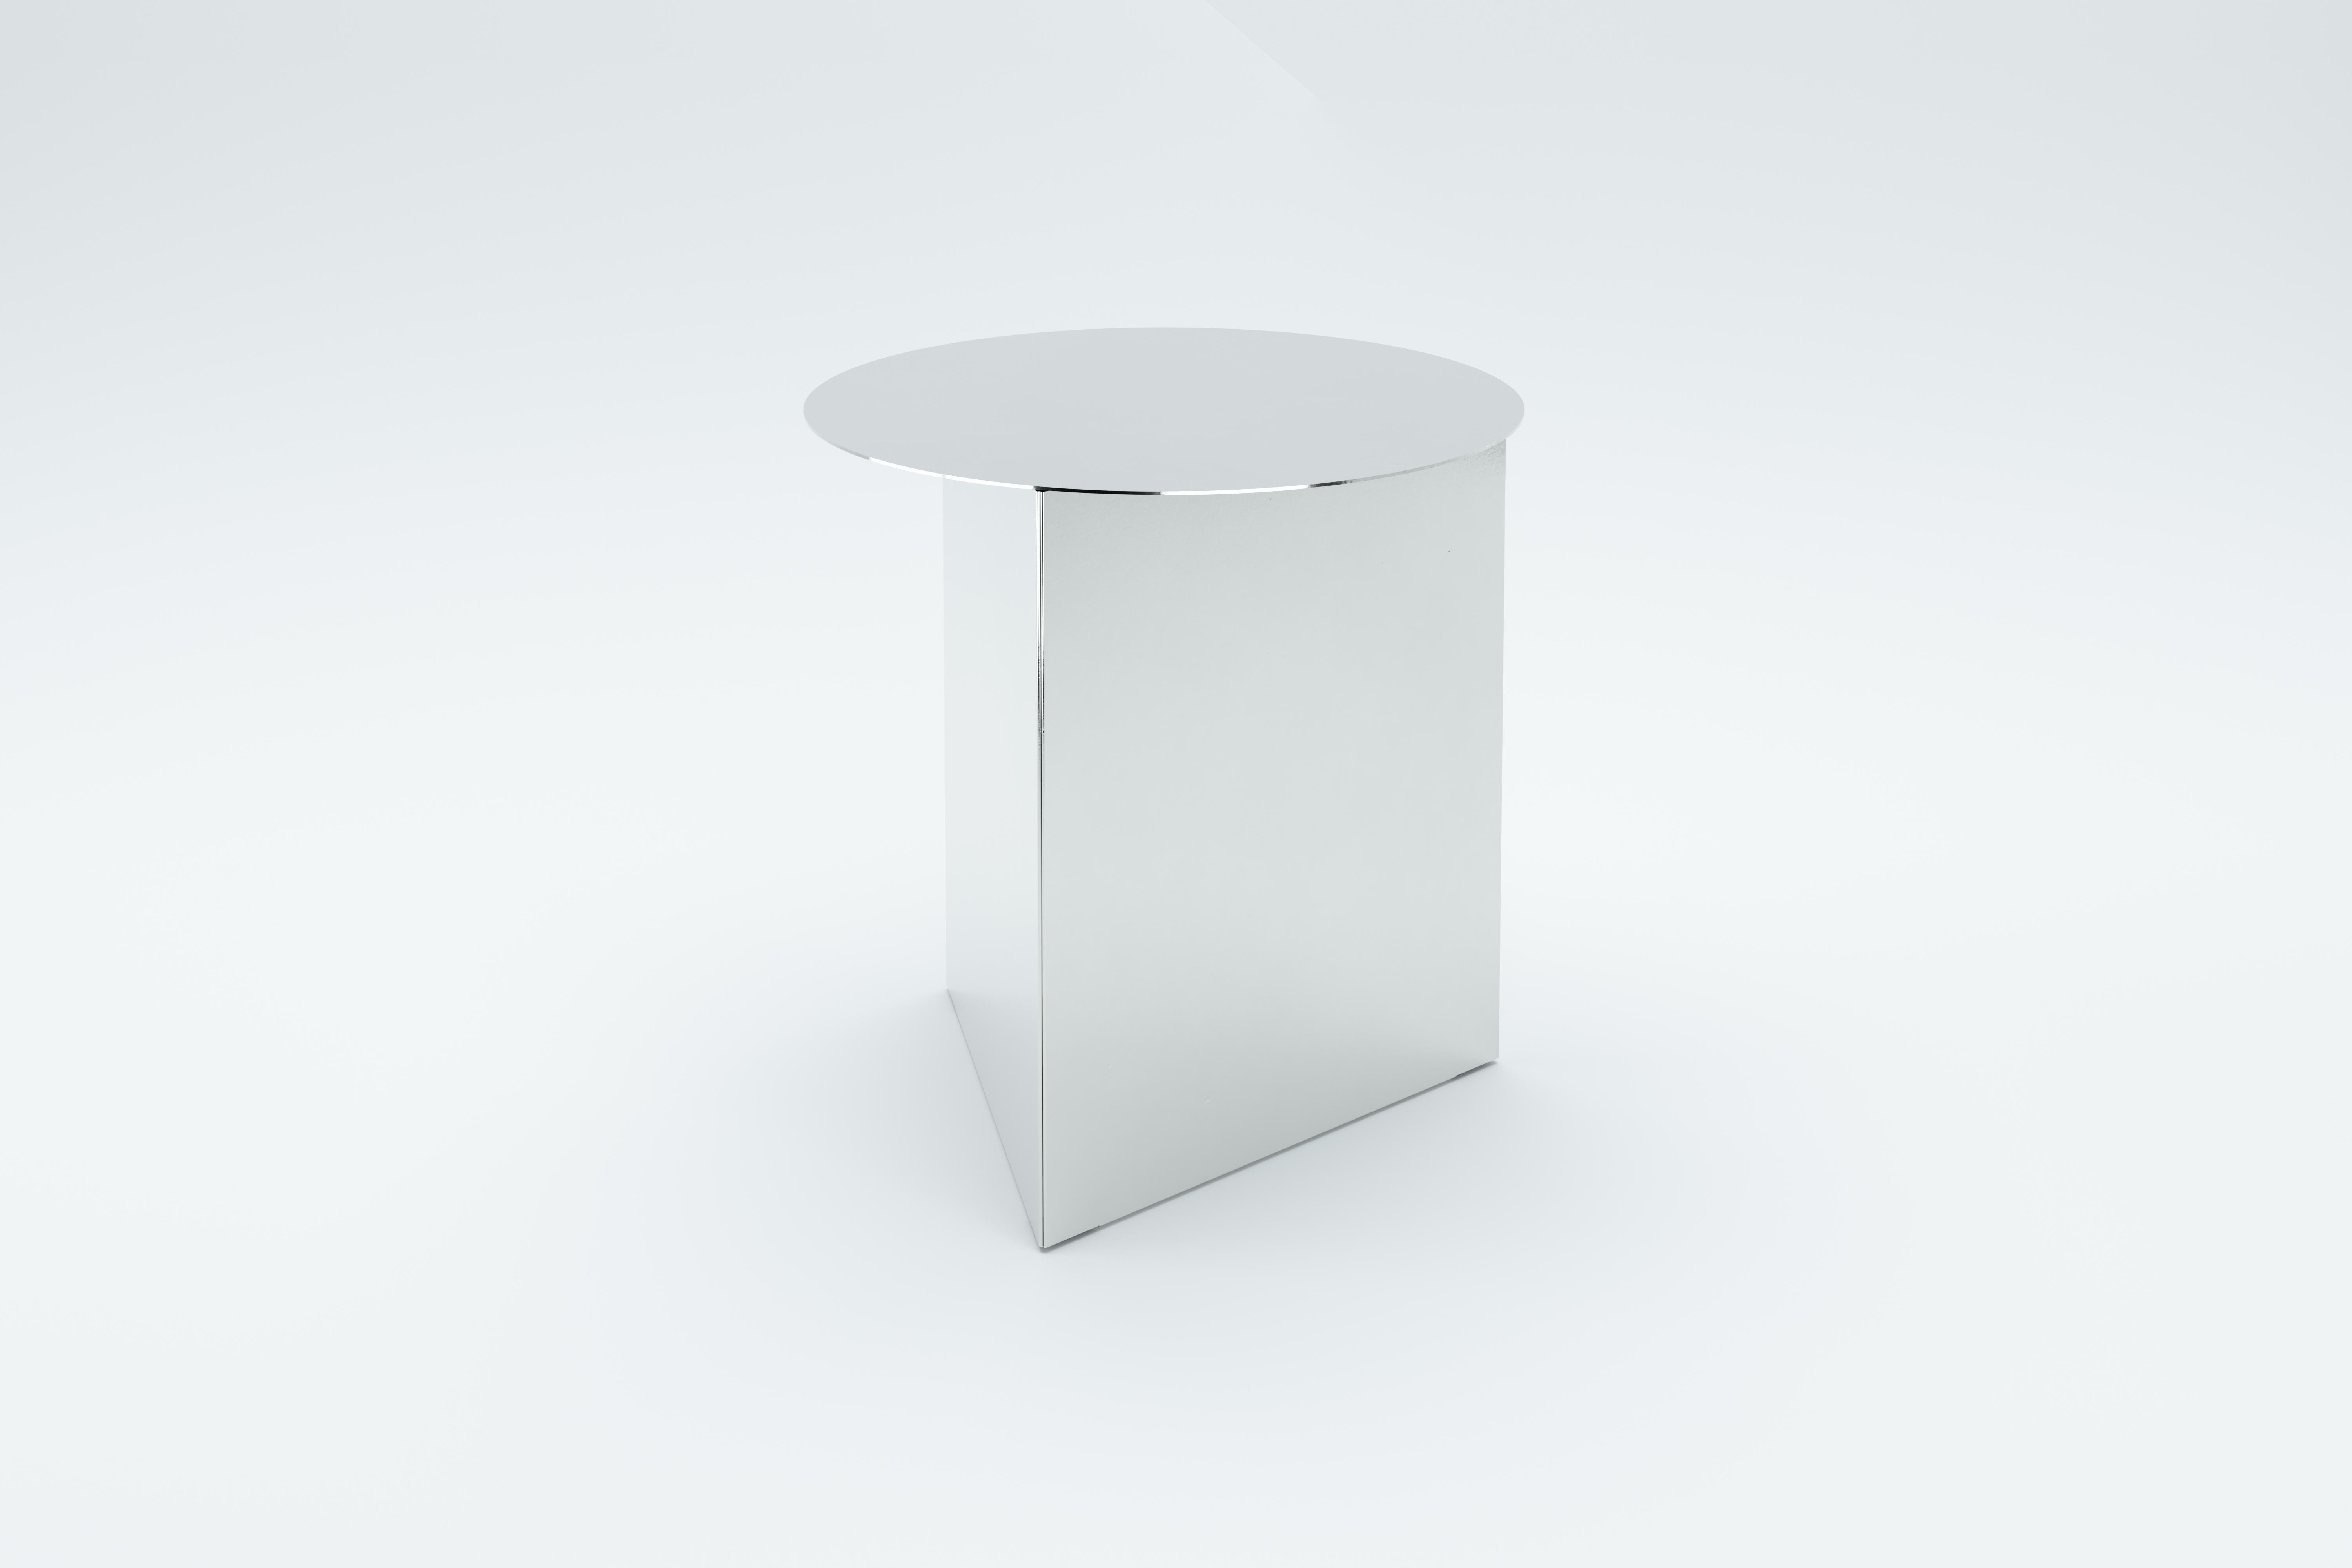 Mirror Prisma tall 45 coffe table by Sebastian Scherer
Dimensions: D 45 x H 45 cm
Materials: Mirror.
Weight: 8.5 kg.
Also available: Mirror silver (stainless steel), mirror gold (brass coated stainless steel / mirror black (black coated